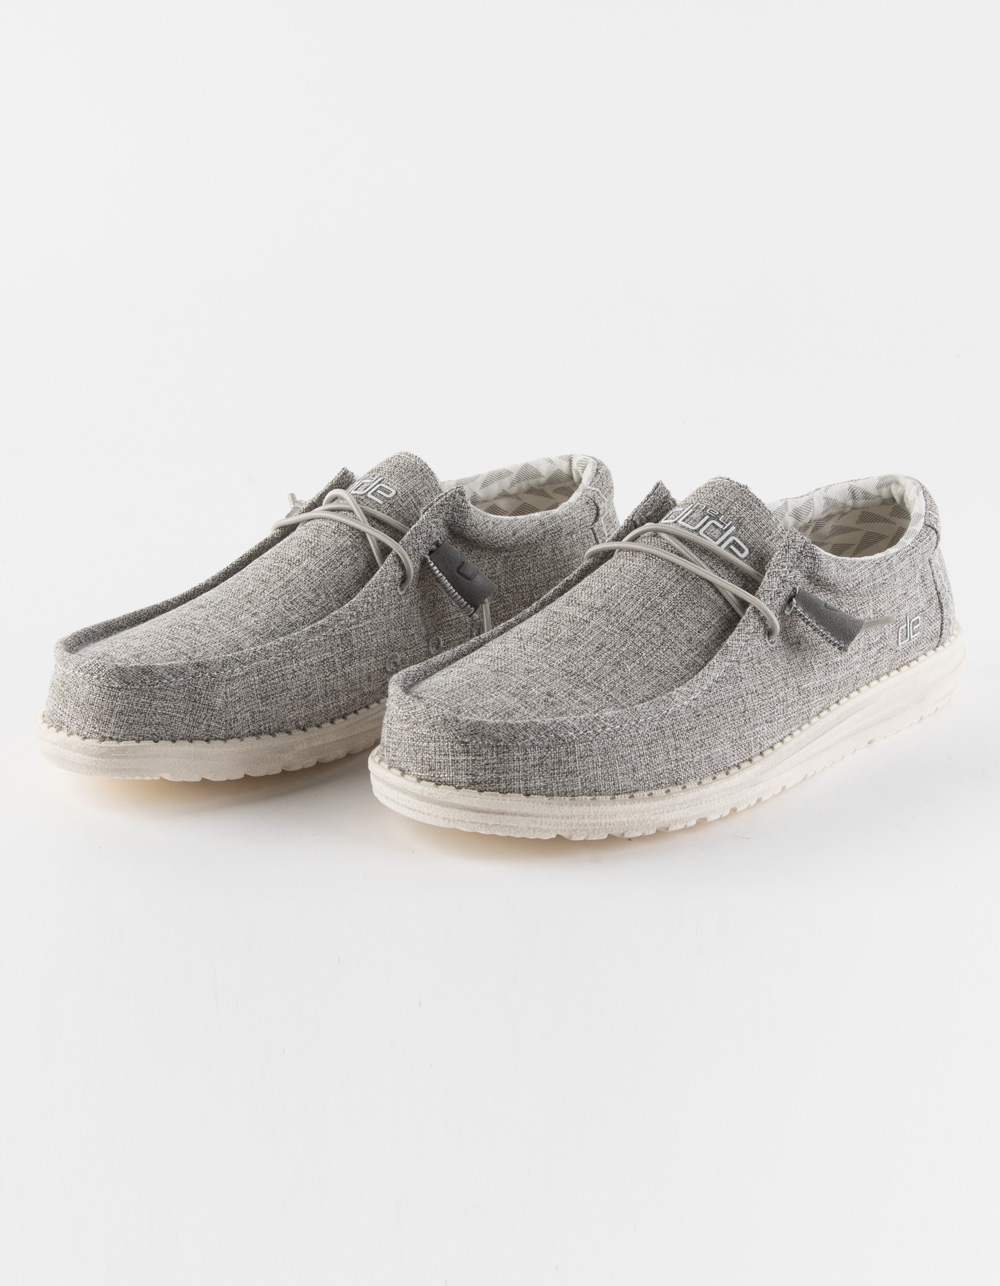 HEY DUDE Wally Linen Mens Shoes